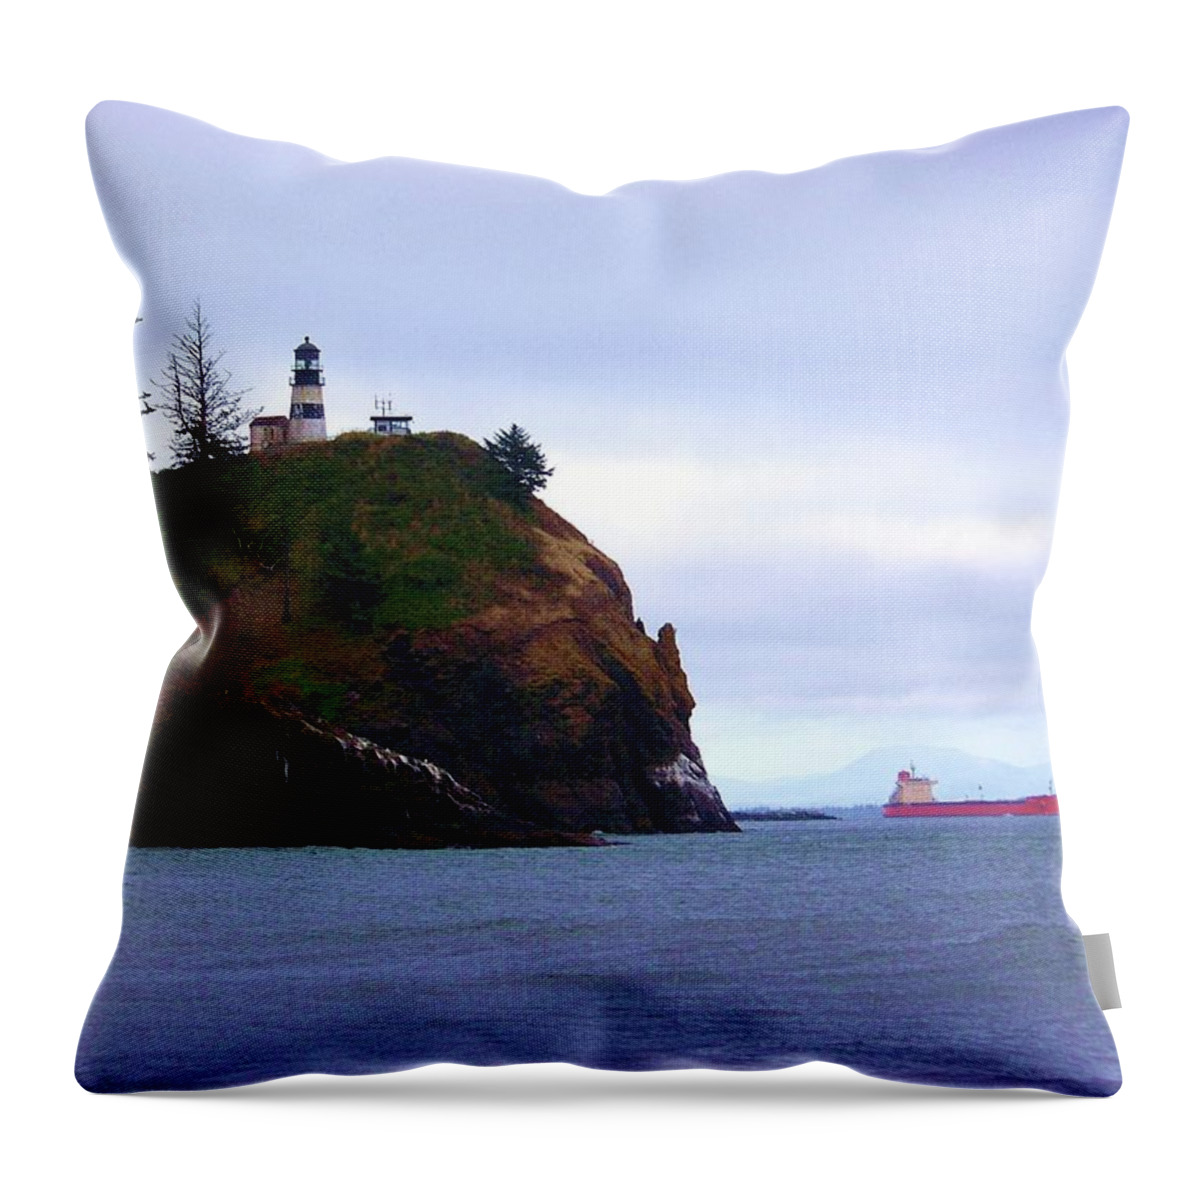 Lighthouse Throw Pillow featuring the photograph From Above by Julie Rauscher